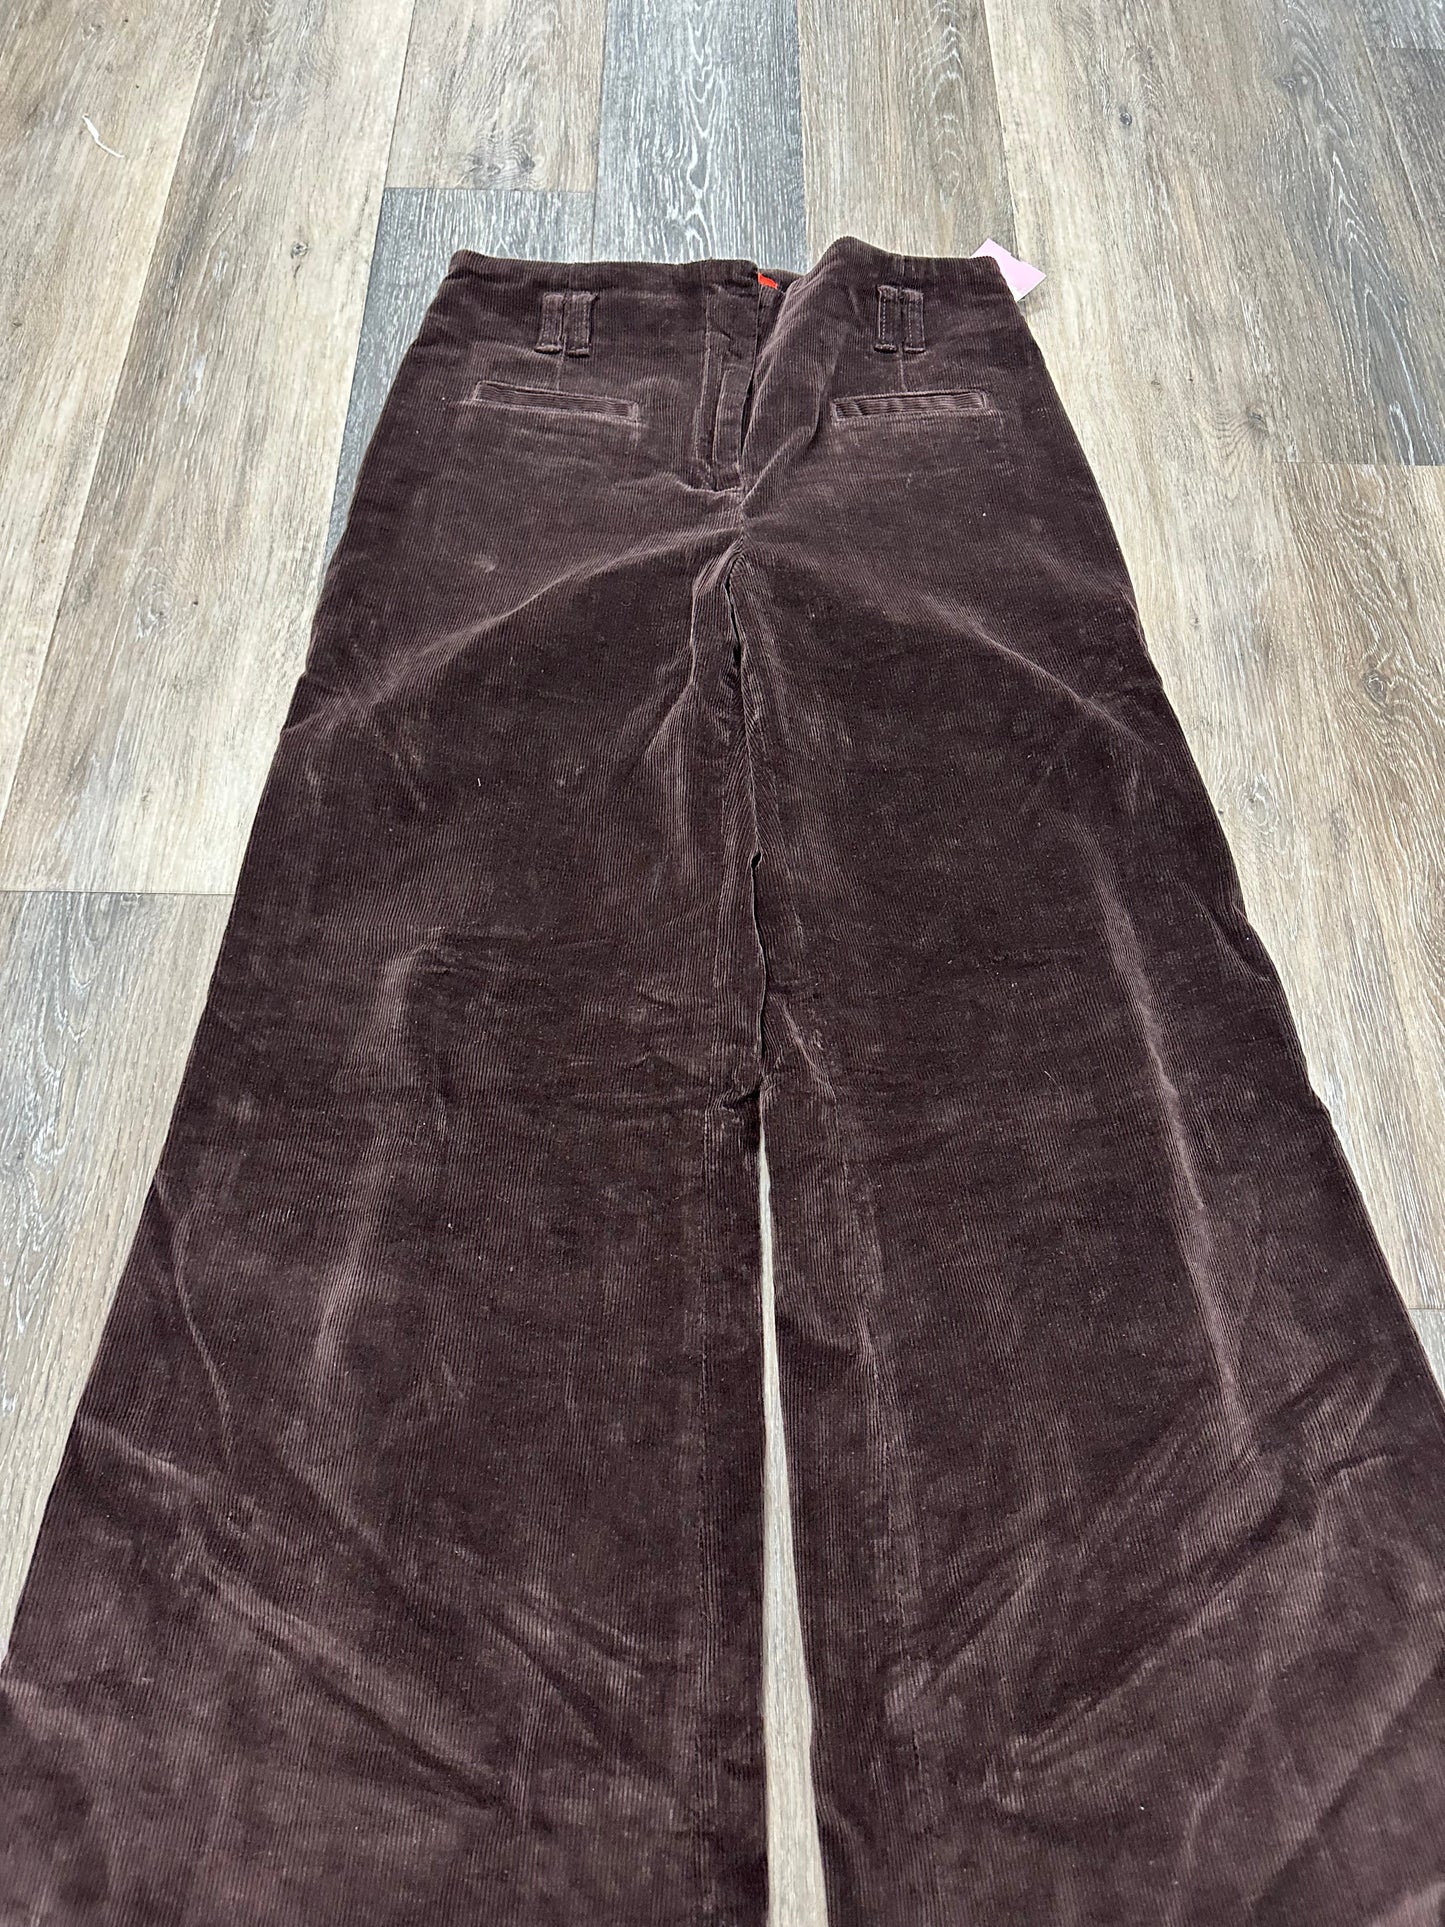 Pants Corduroy By Anthropologie  Size: 8